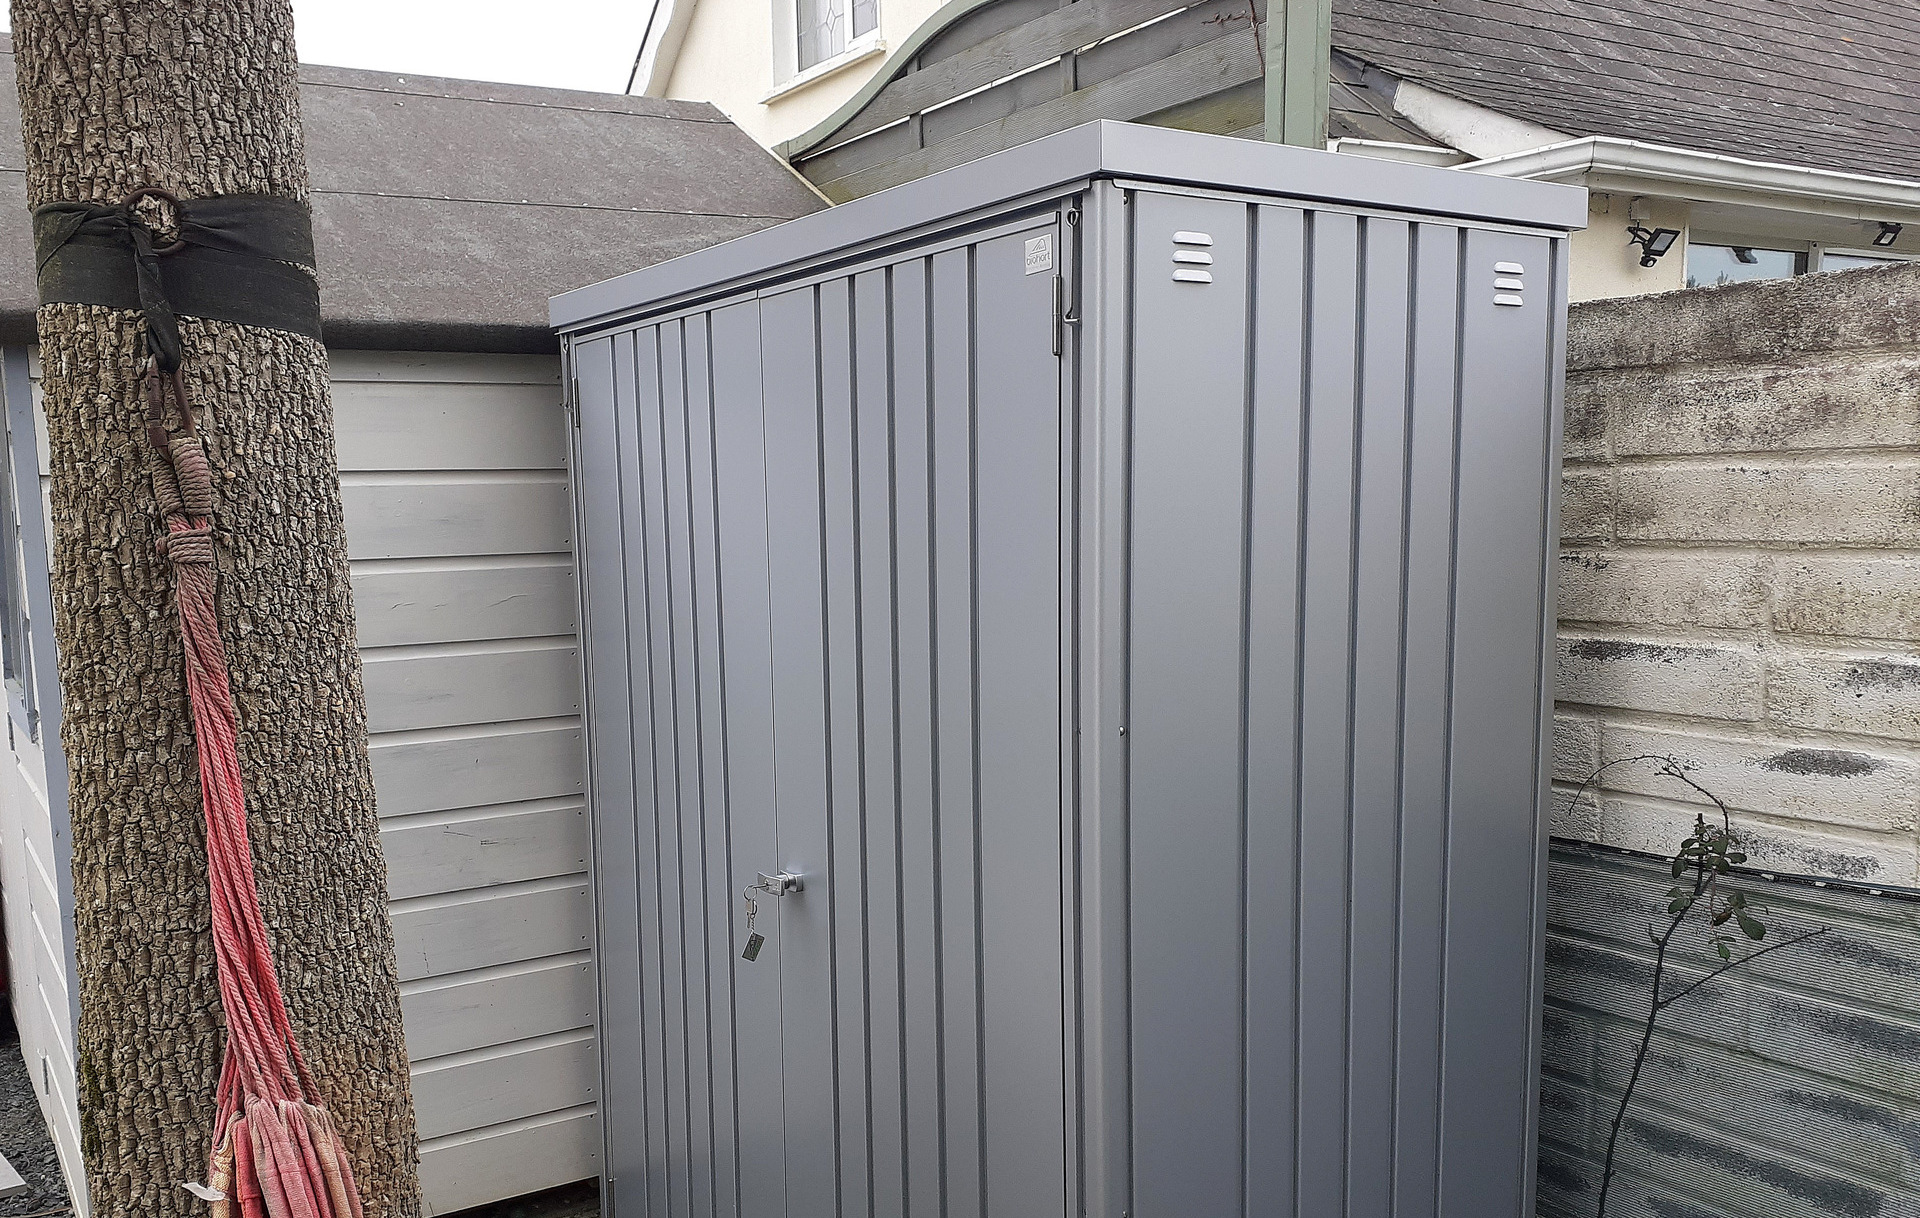 The superb quality and style of the Biohort Equipment Locker 150 in metallic silver  | supplied + installed in Gorey, Co Wexford  by Owen Chubb Landscapers. Ireland's # 1 Biohort Dealer and Biohort Certified Installation Partner. Tel 087-2306 128.